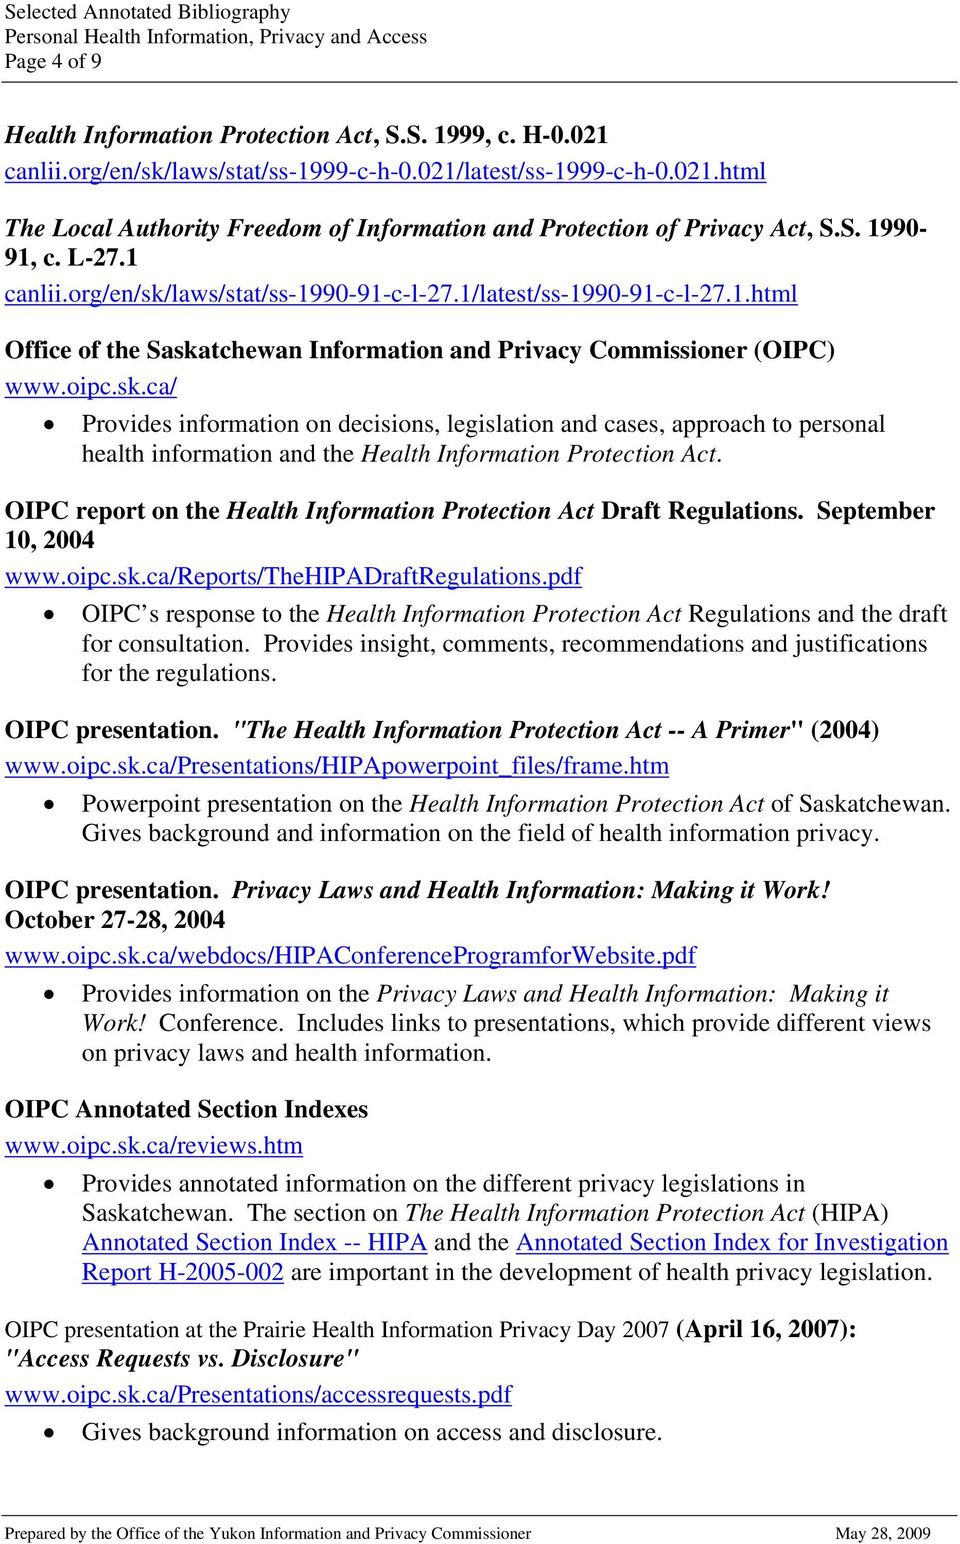 OIPC report on the Health Information Protection Act Draft Regulations. September 10, 2004 www.oipc.sk.ca/reports/thehipadraftregulations.